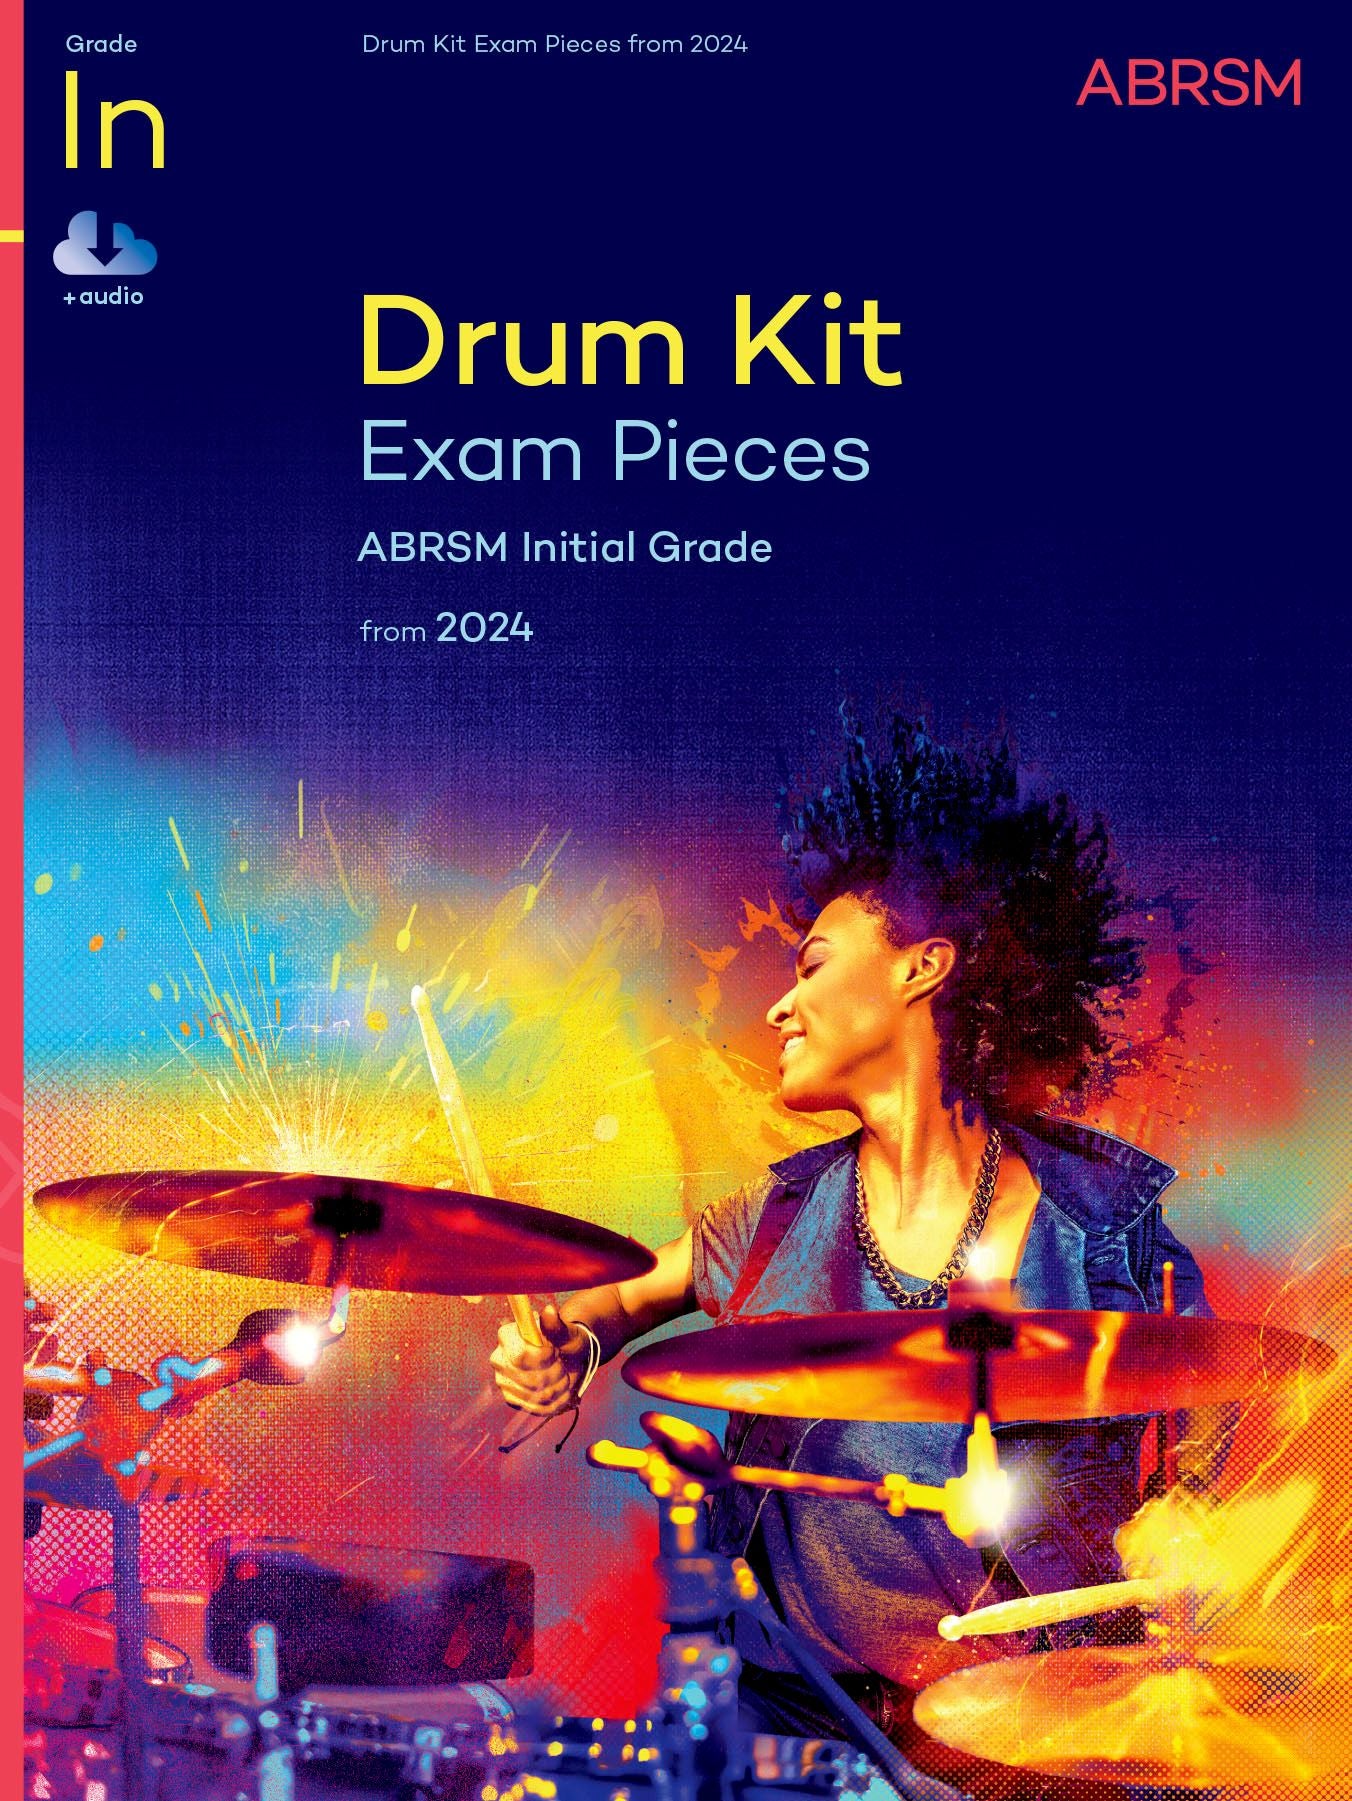 ABRSM Drum Kit Exam Pieces, Initial Grade, from 2024 (w/ Audio)